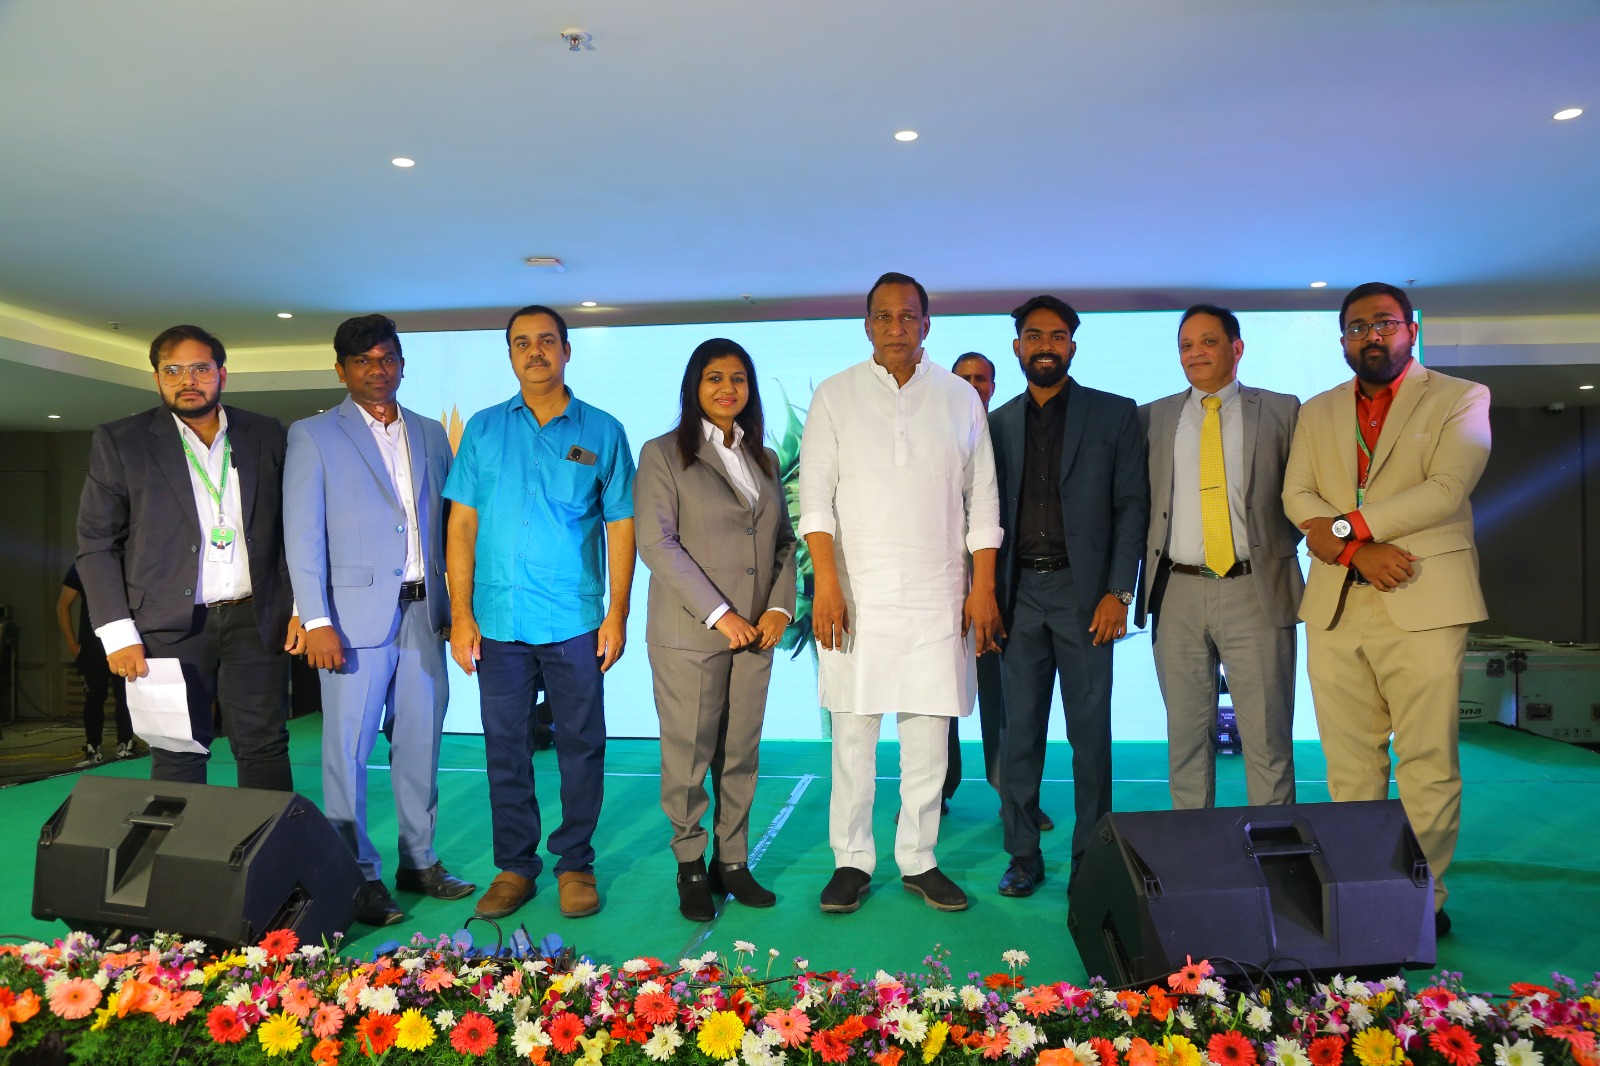 BeeS Software Solutions Private Limited Launches Revolutionary Product, Cloudilya-The ERP Sutra, with Esteemed Chief Guest, Hon’ble Minister of Labour and Employment of Telangana Sri.Ch.Malla Reddy Garu.